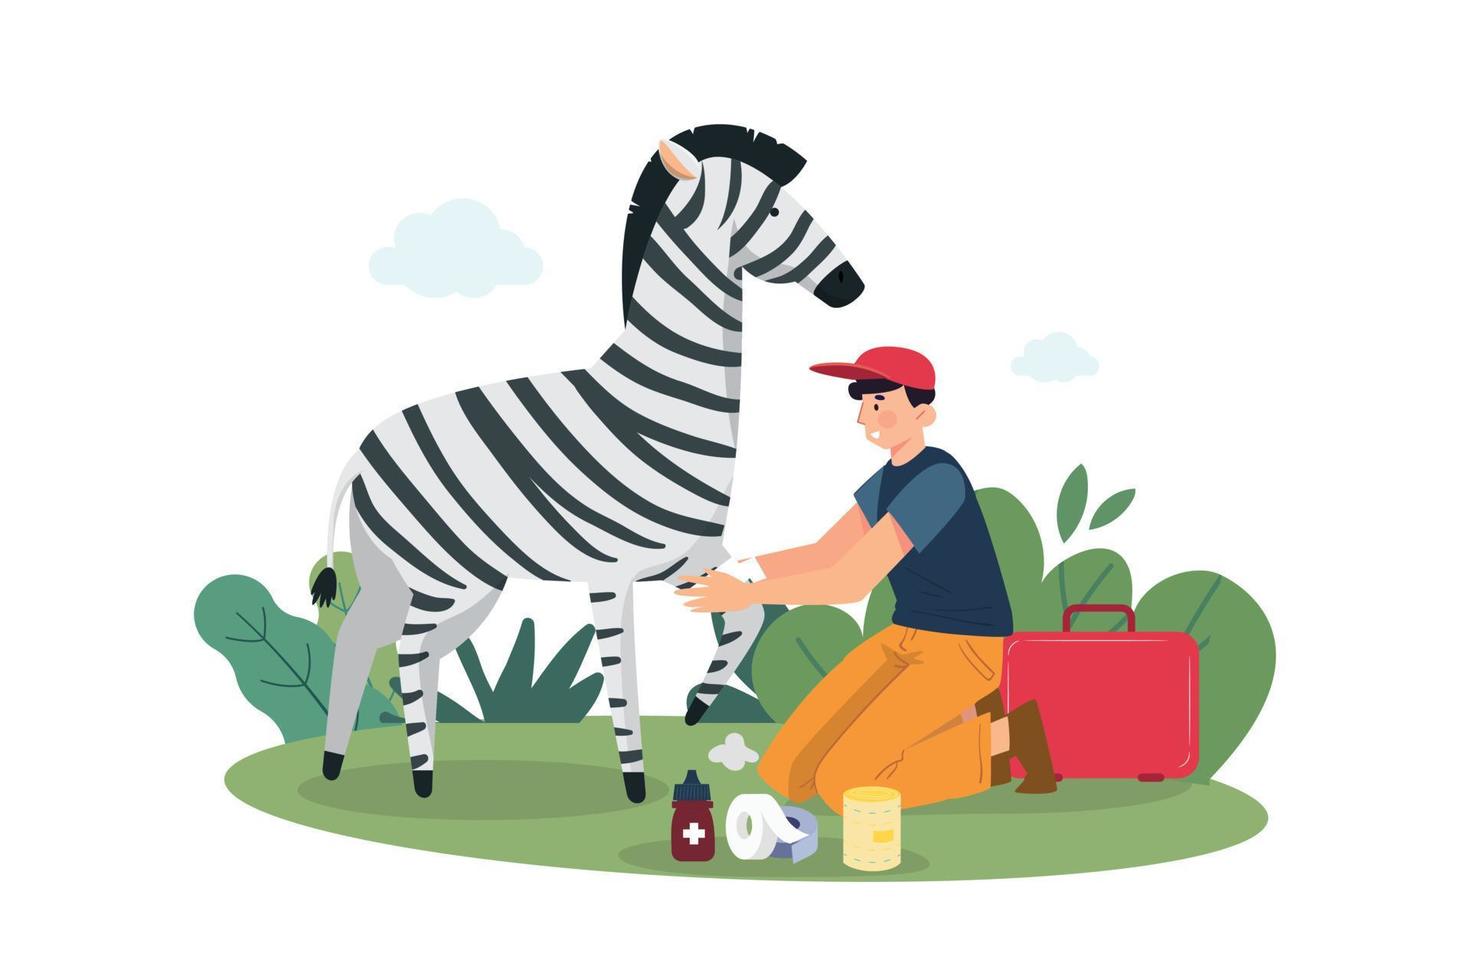 Caring For Animals Illustration concept on white background vector